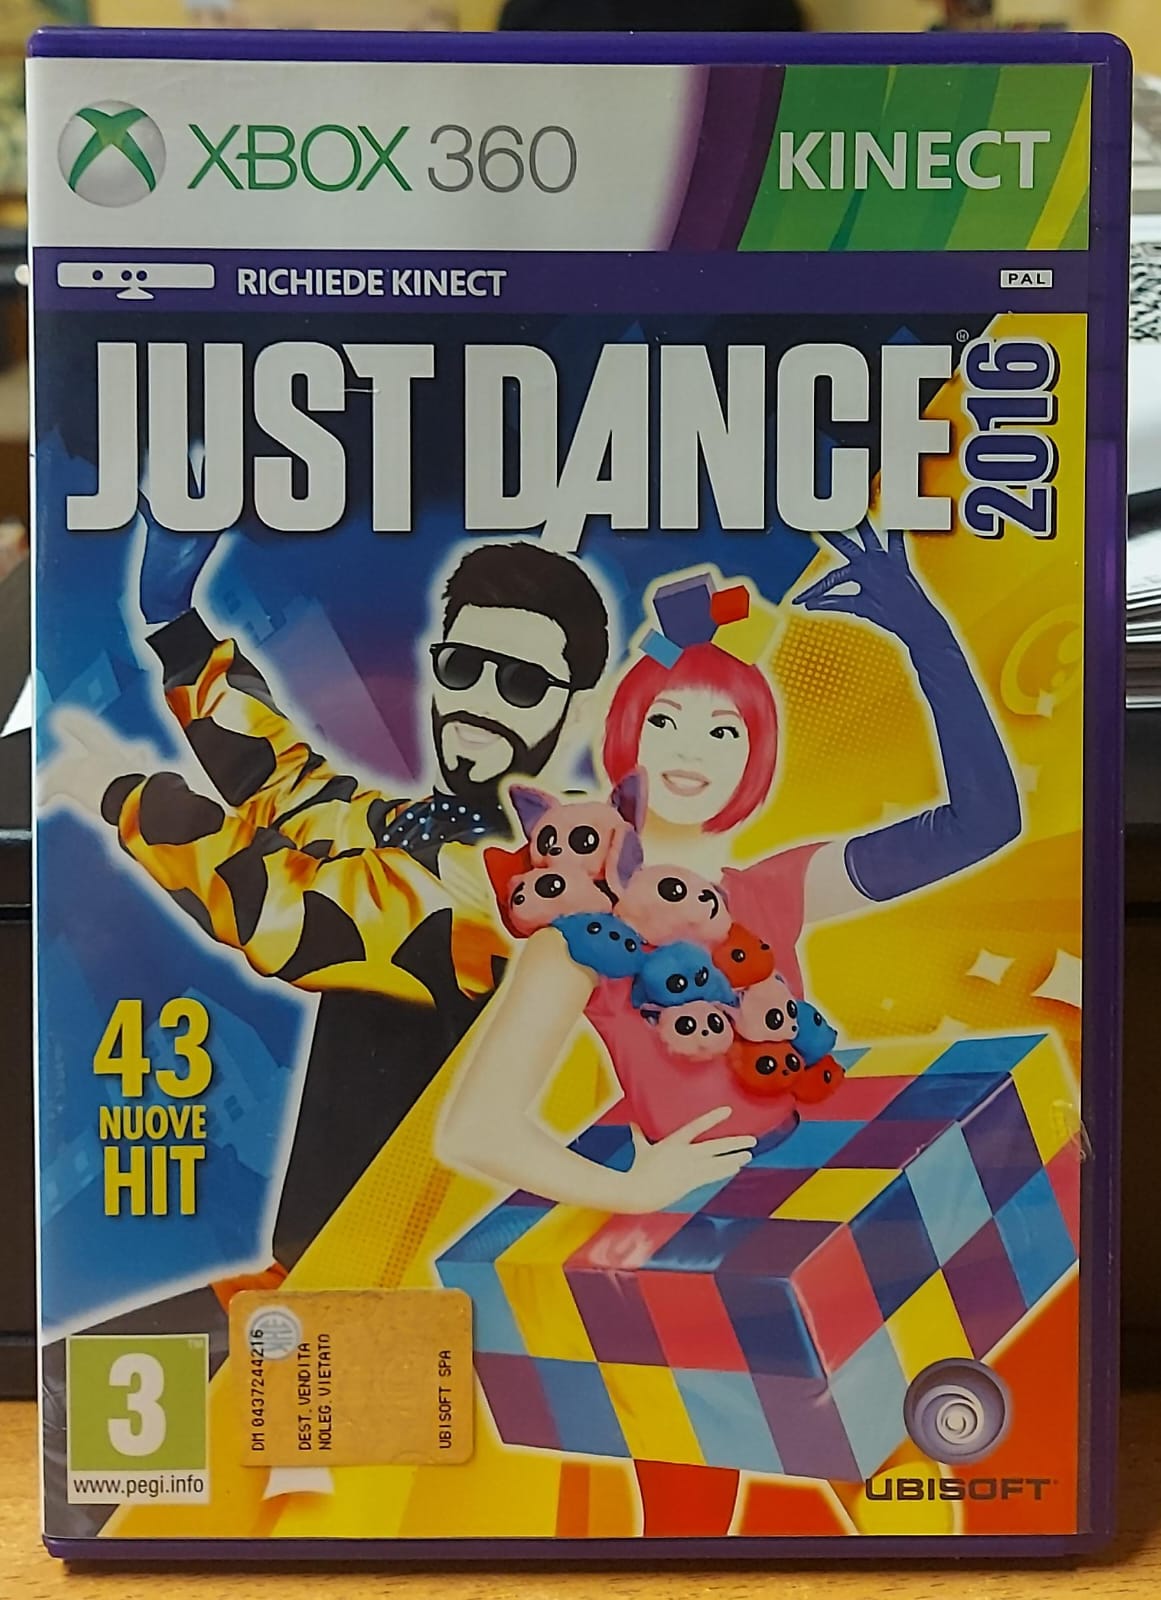 JUST DANCE 2016 - RICHIEDE KINECT